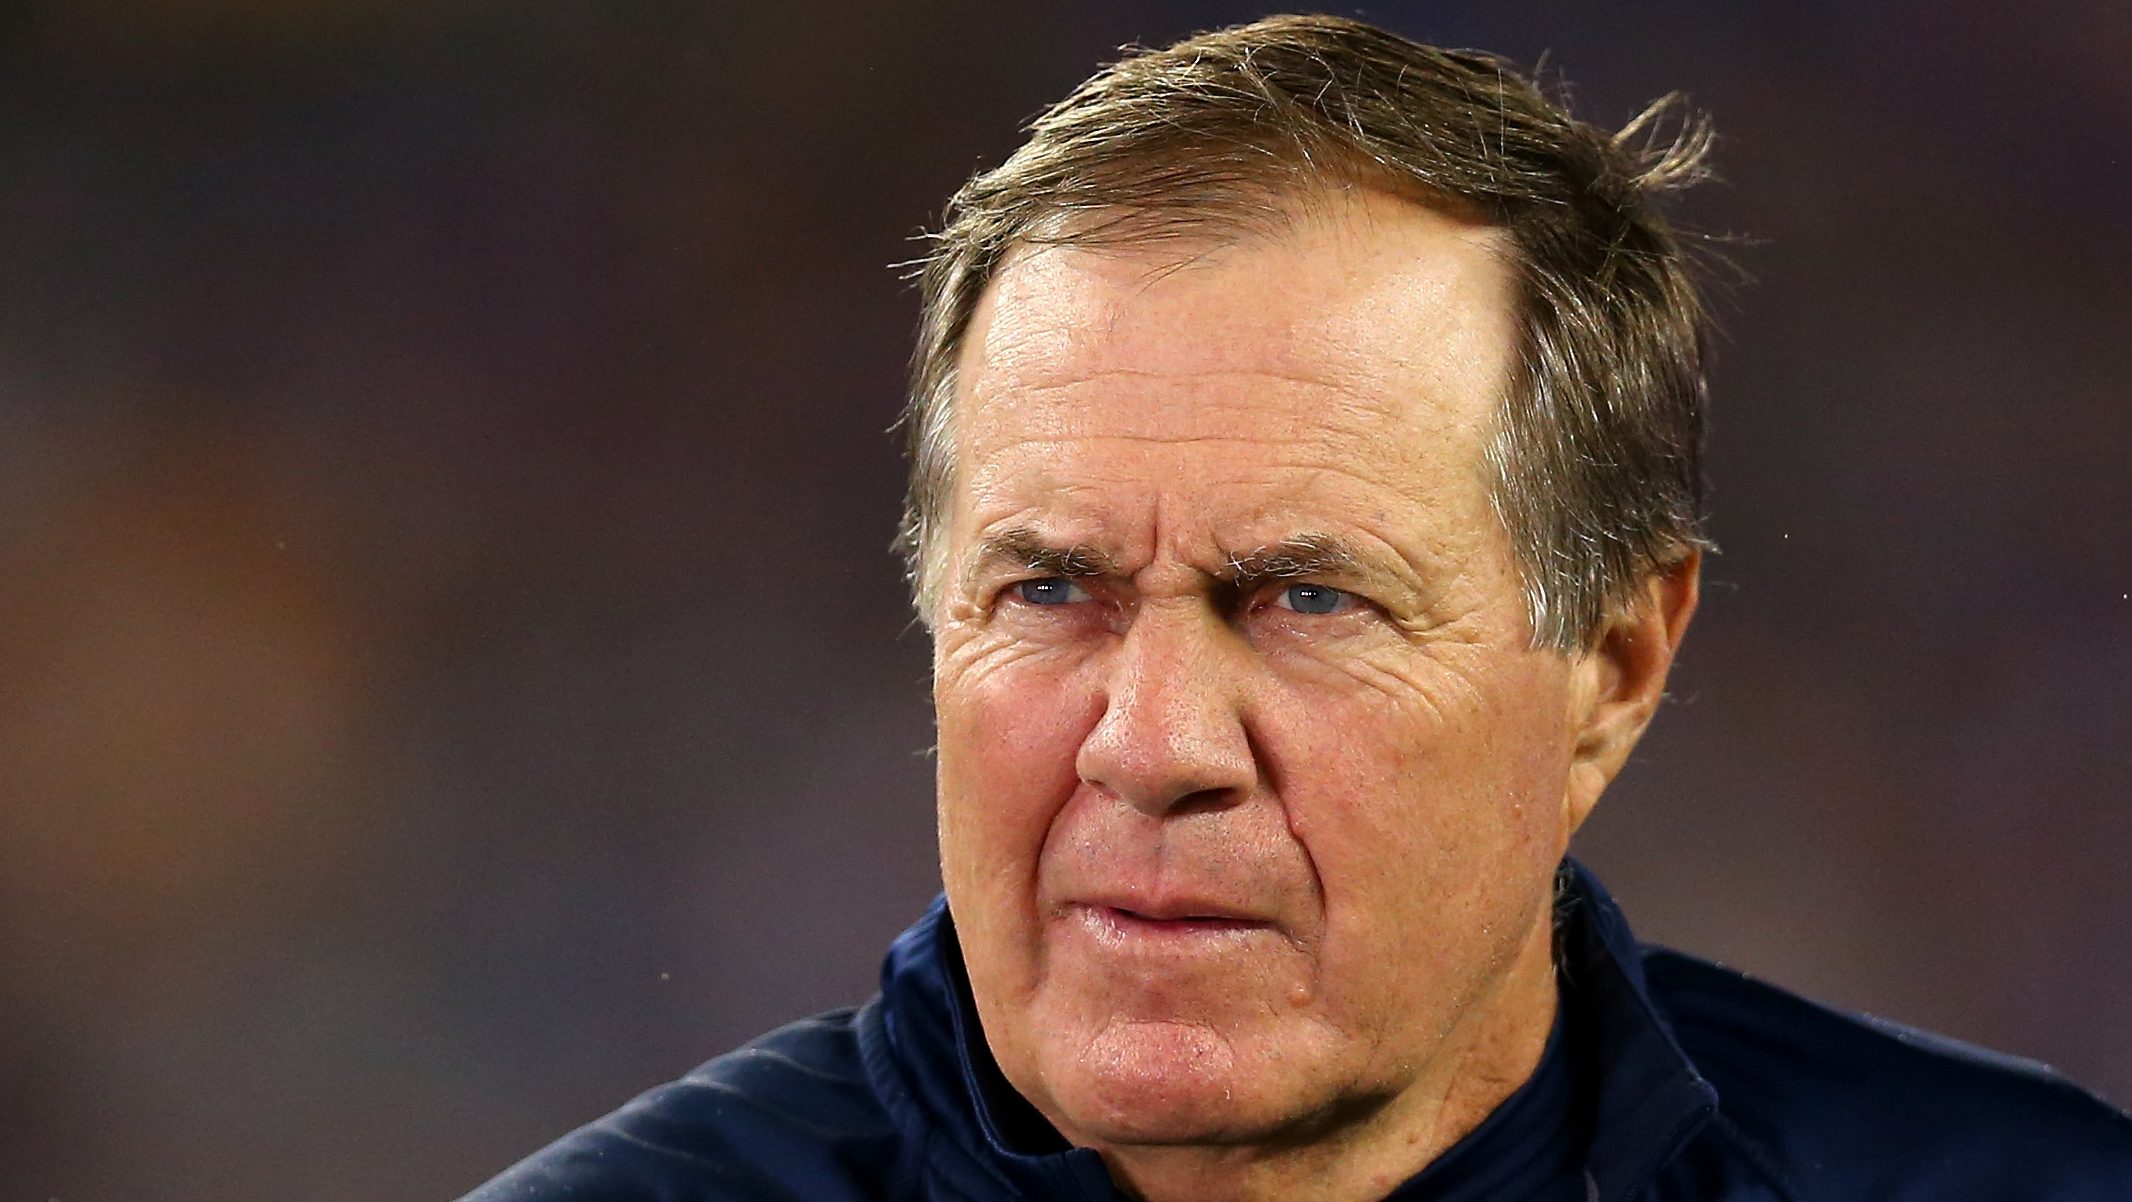 Belichick Salary How Much Does the Patriots Legend Make?